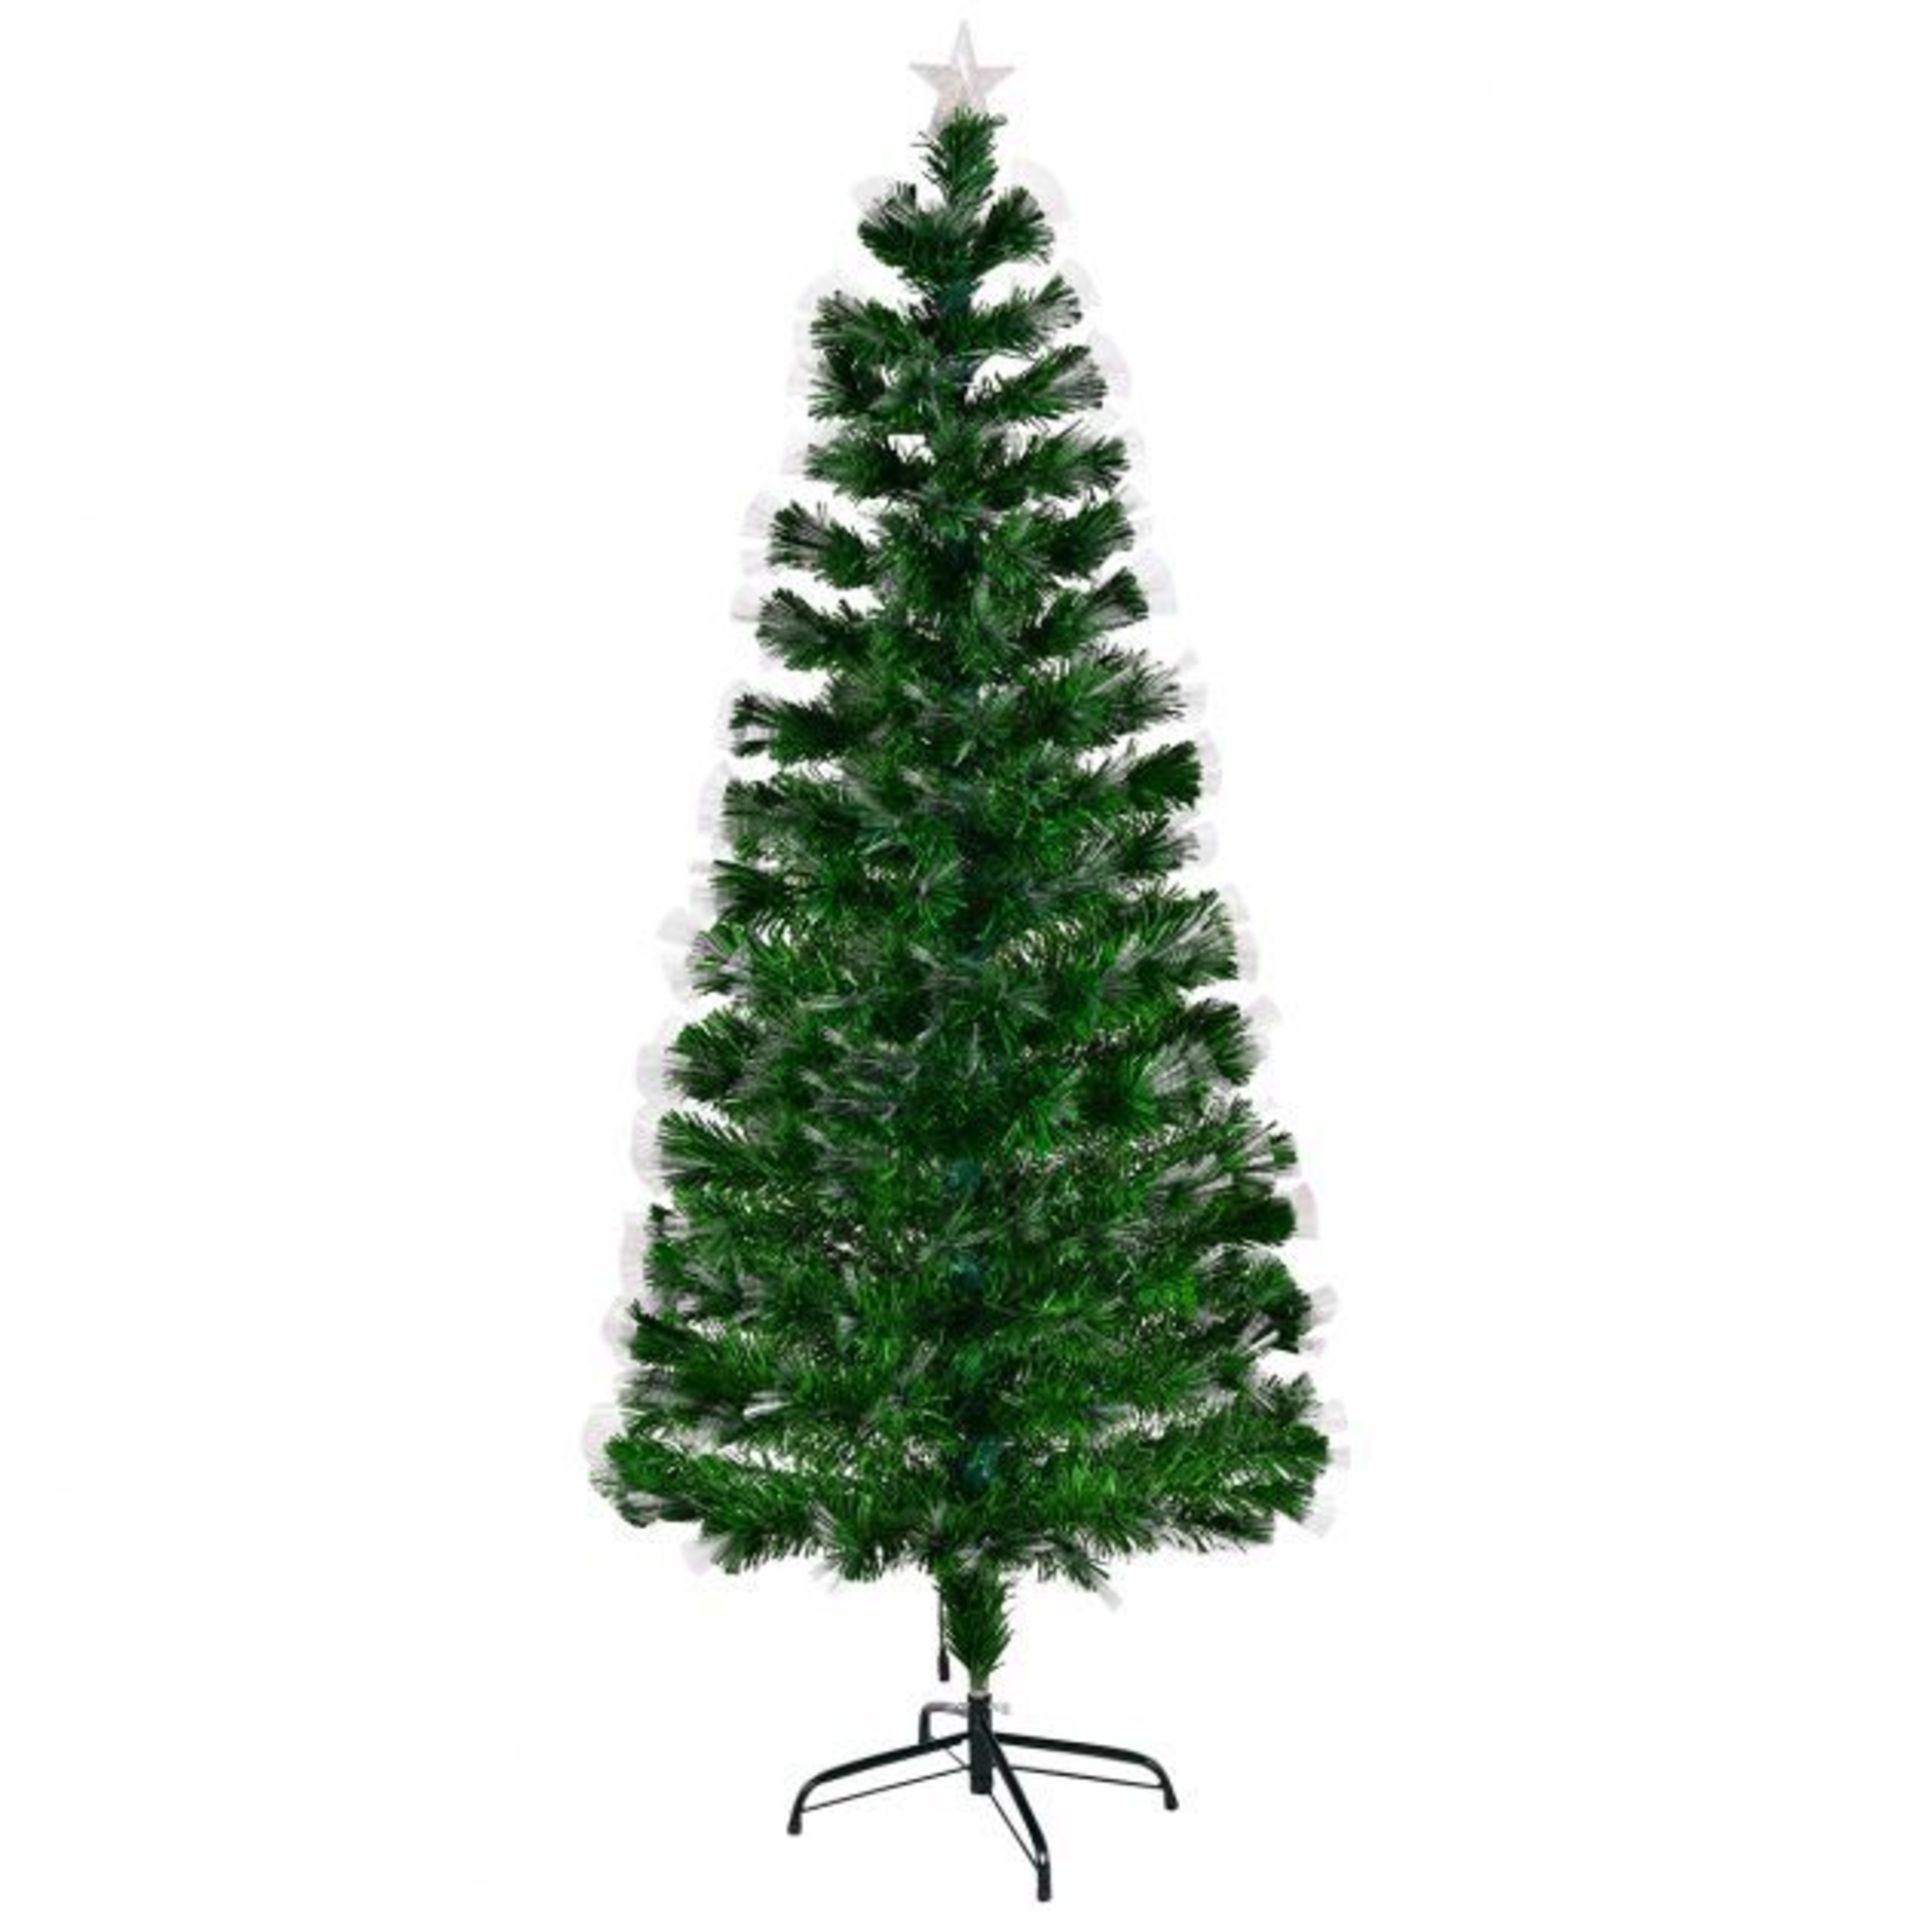 6ft Fibre Optic Christmas Tree with Top Star. - ER25. A fibre optic Christmas tree takes away the